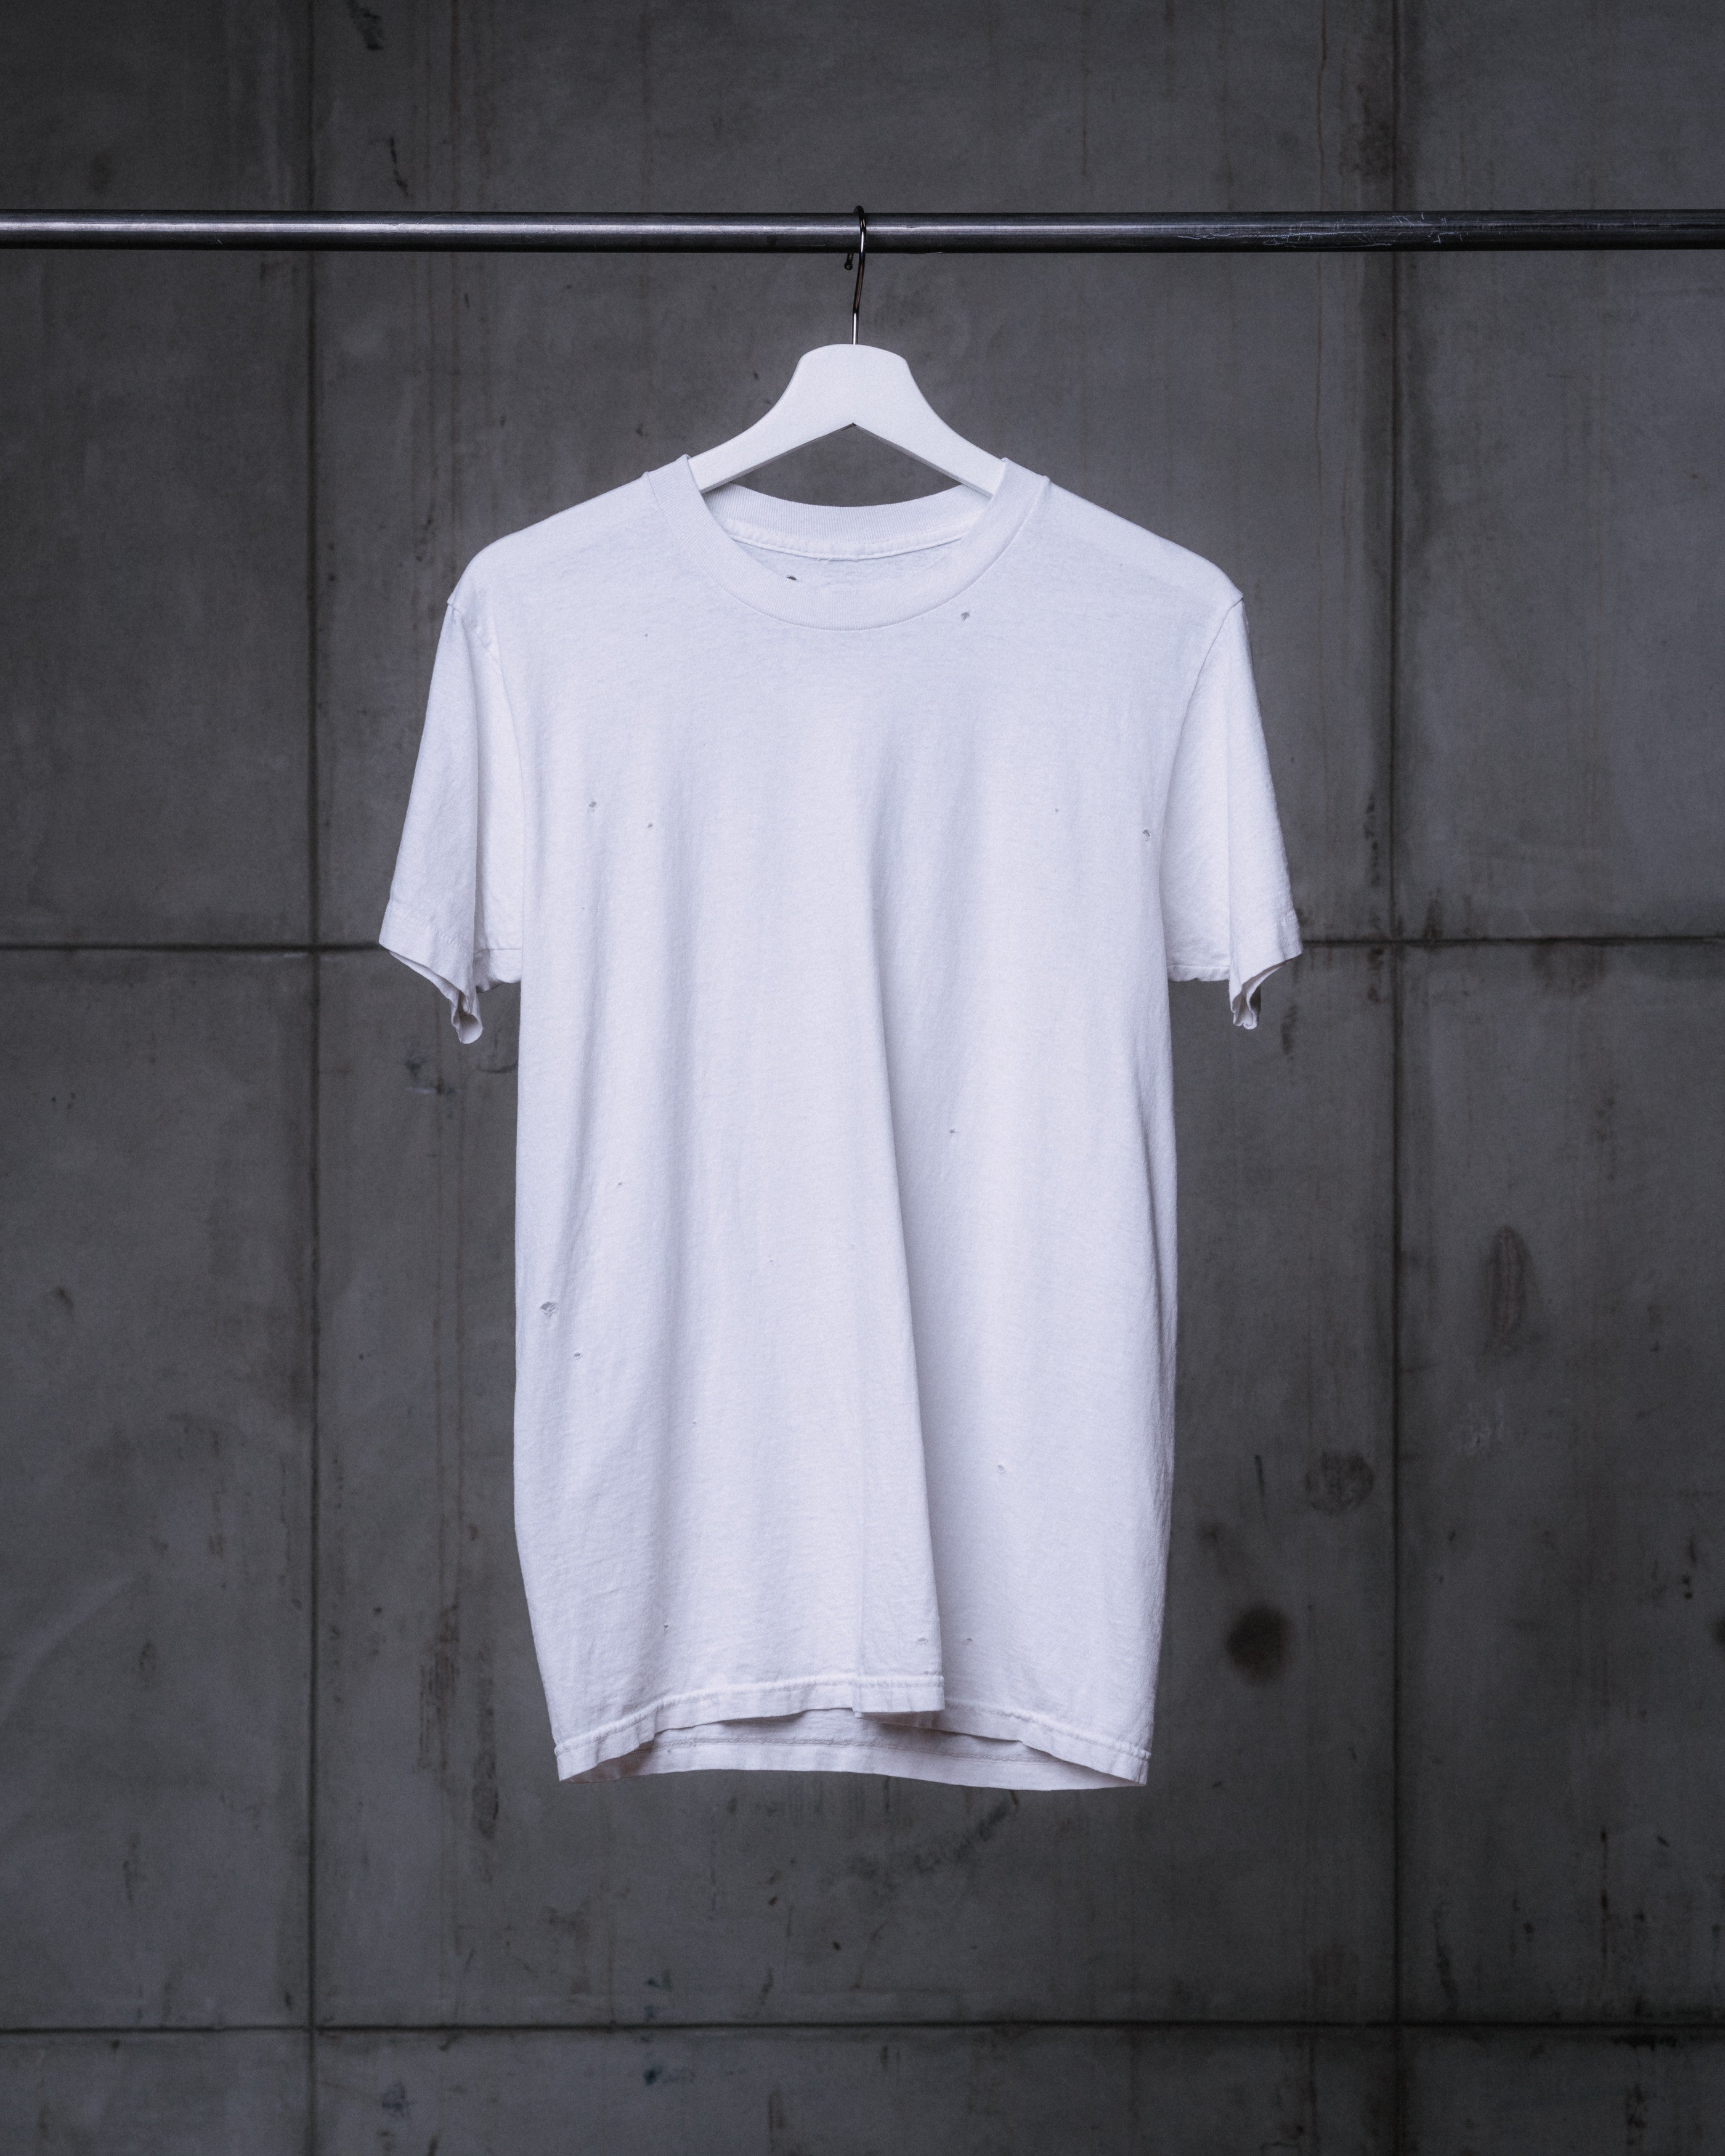 Download Blank White Tee - Blank clo